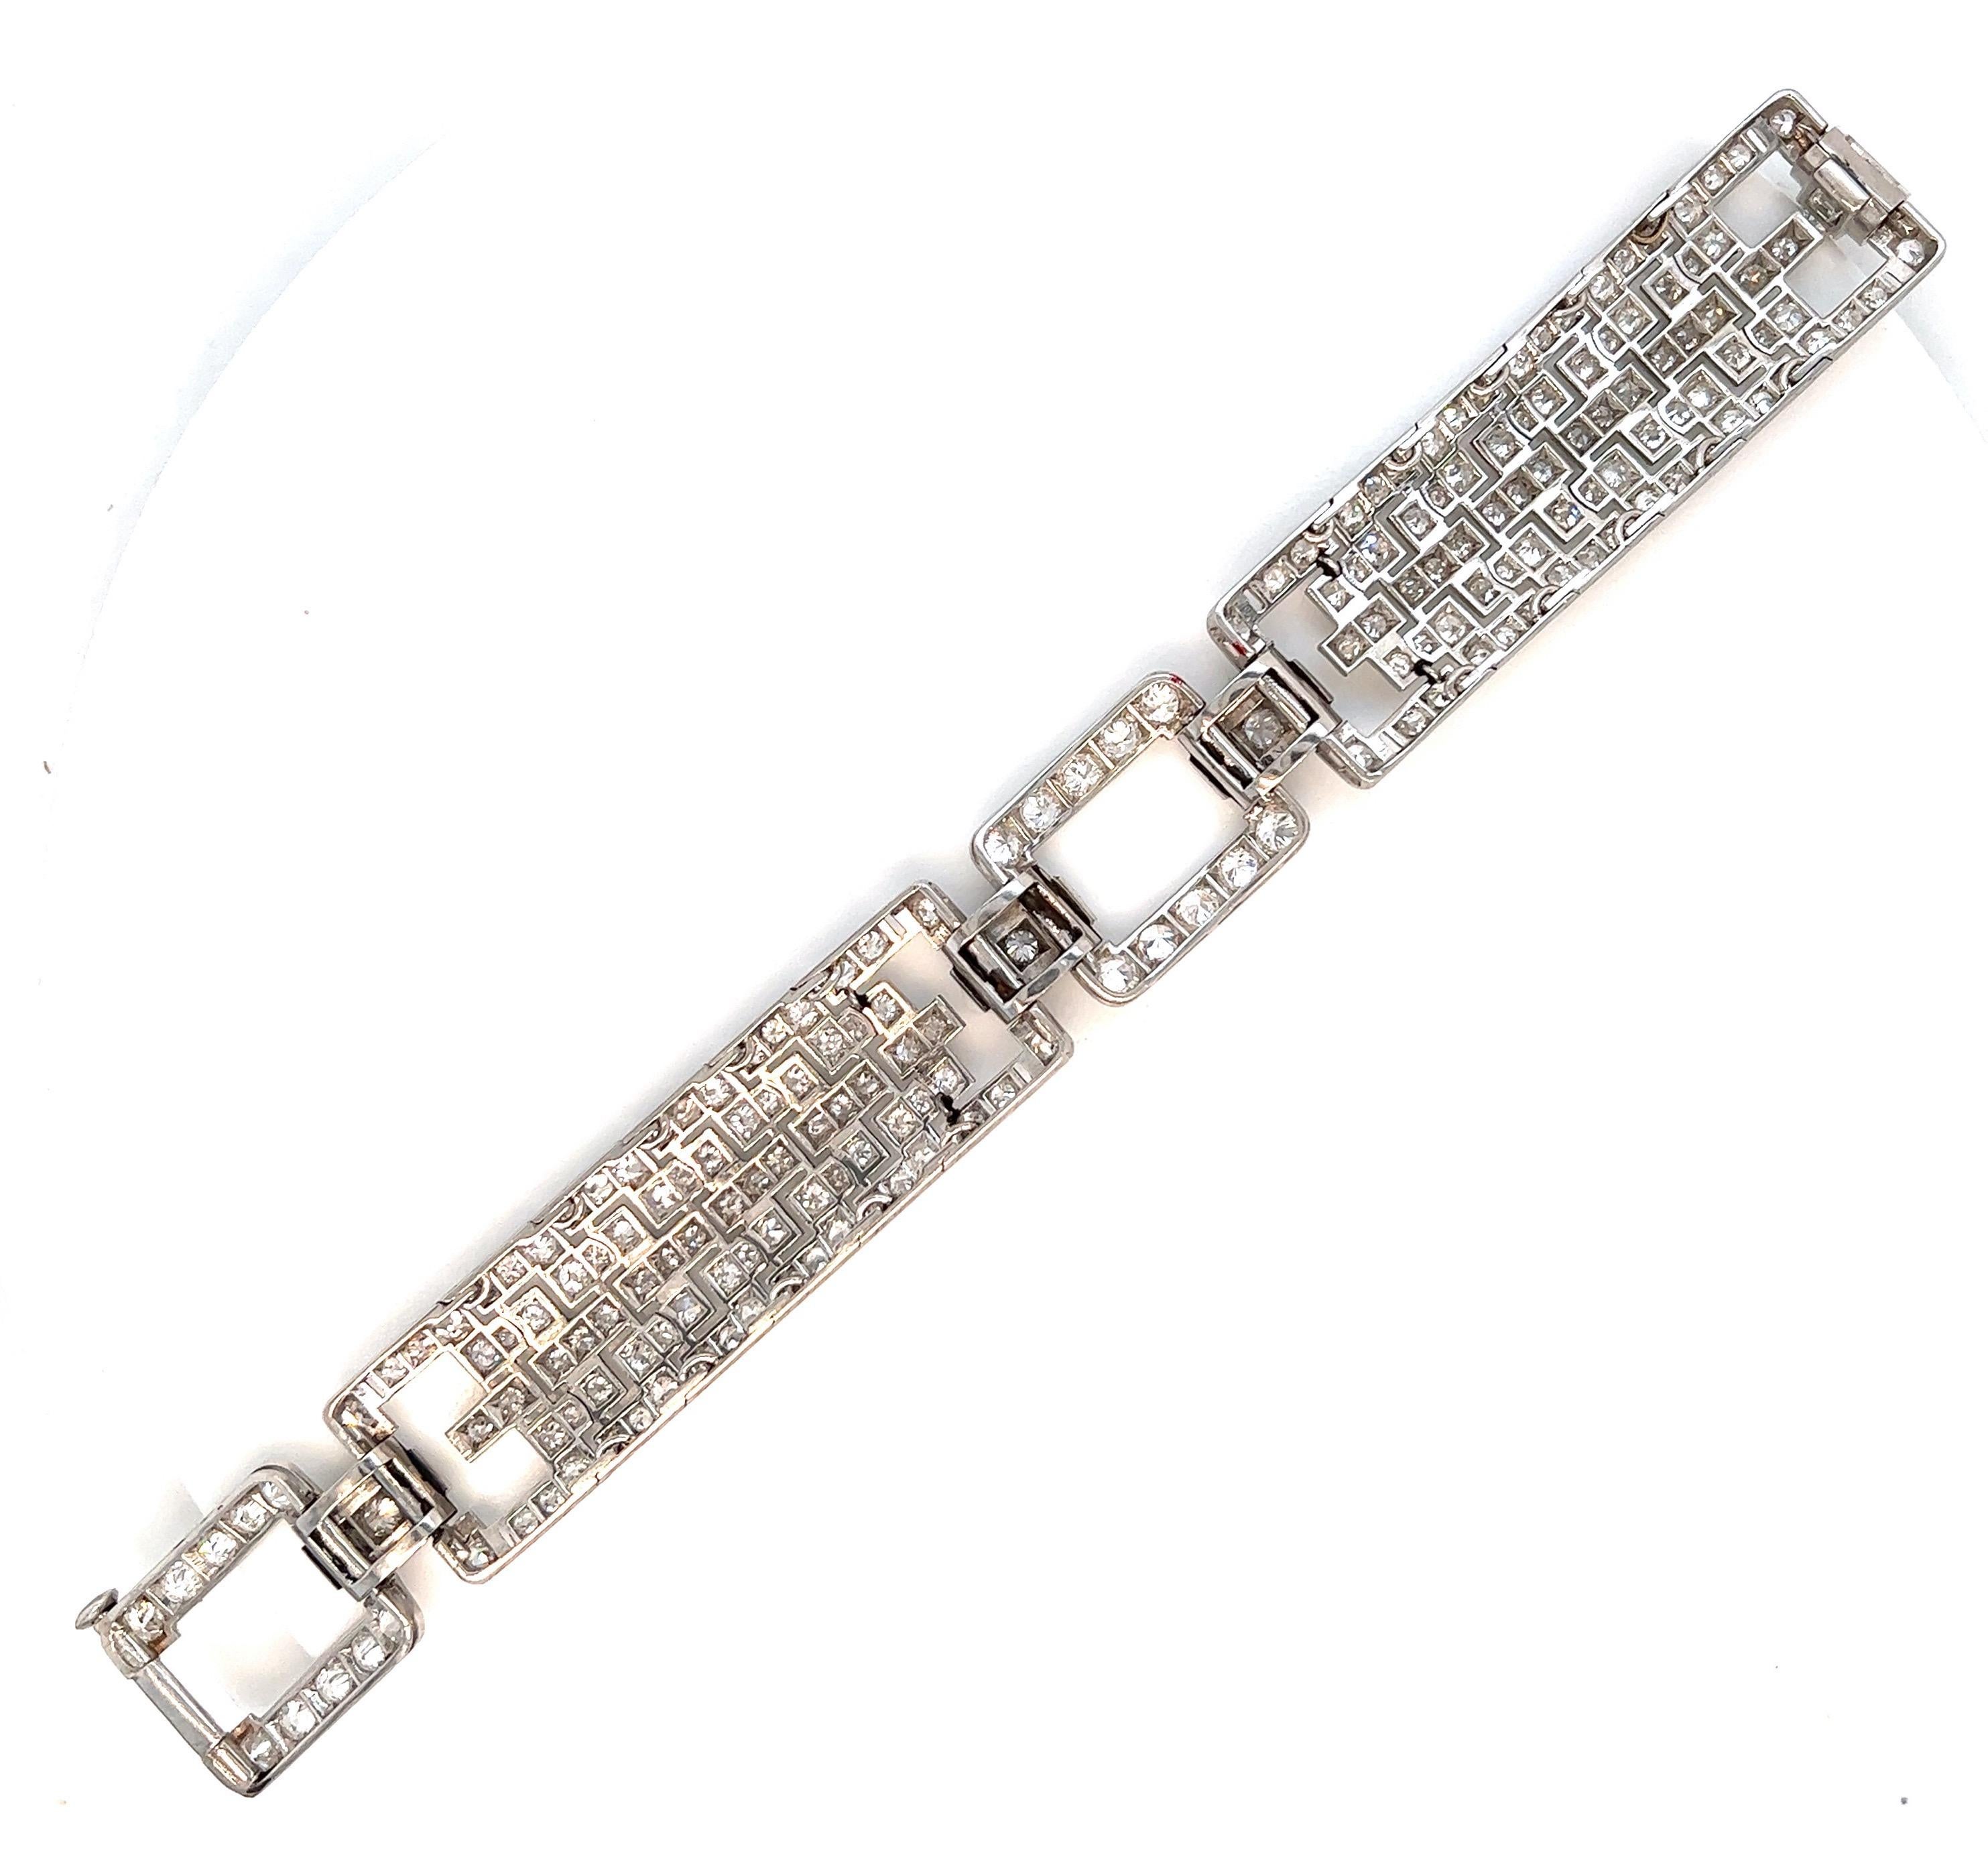 Art deco bracelet made out of platinum and set with brilliant, single-cut, and square diamonds weighing approximately 12 carats. Total weight: 41.1 grams. Width: 0.69 inch. Length: 6.75 inches. Circa 1935. Comes in original fitted box. 